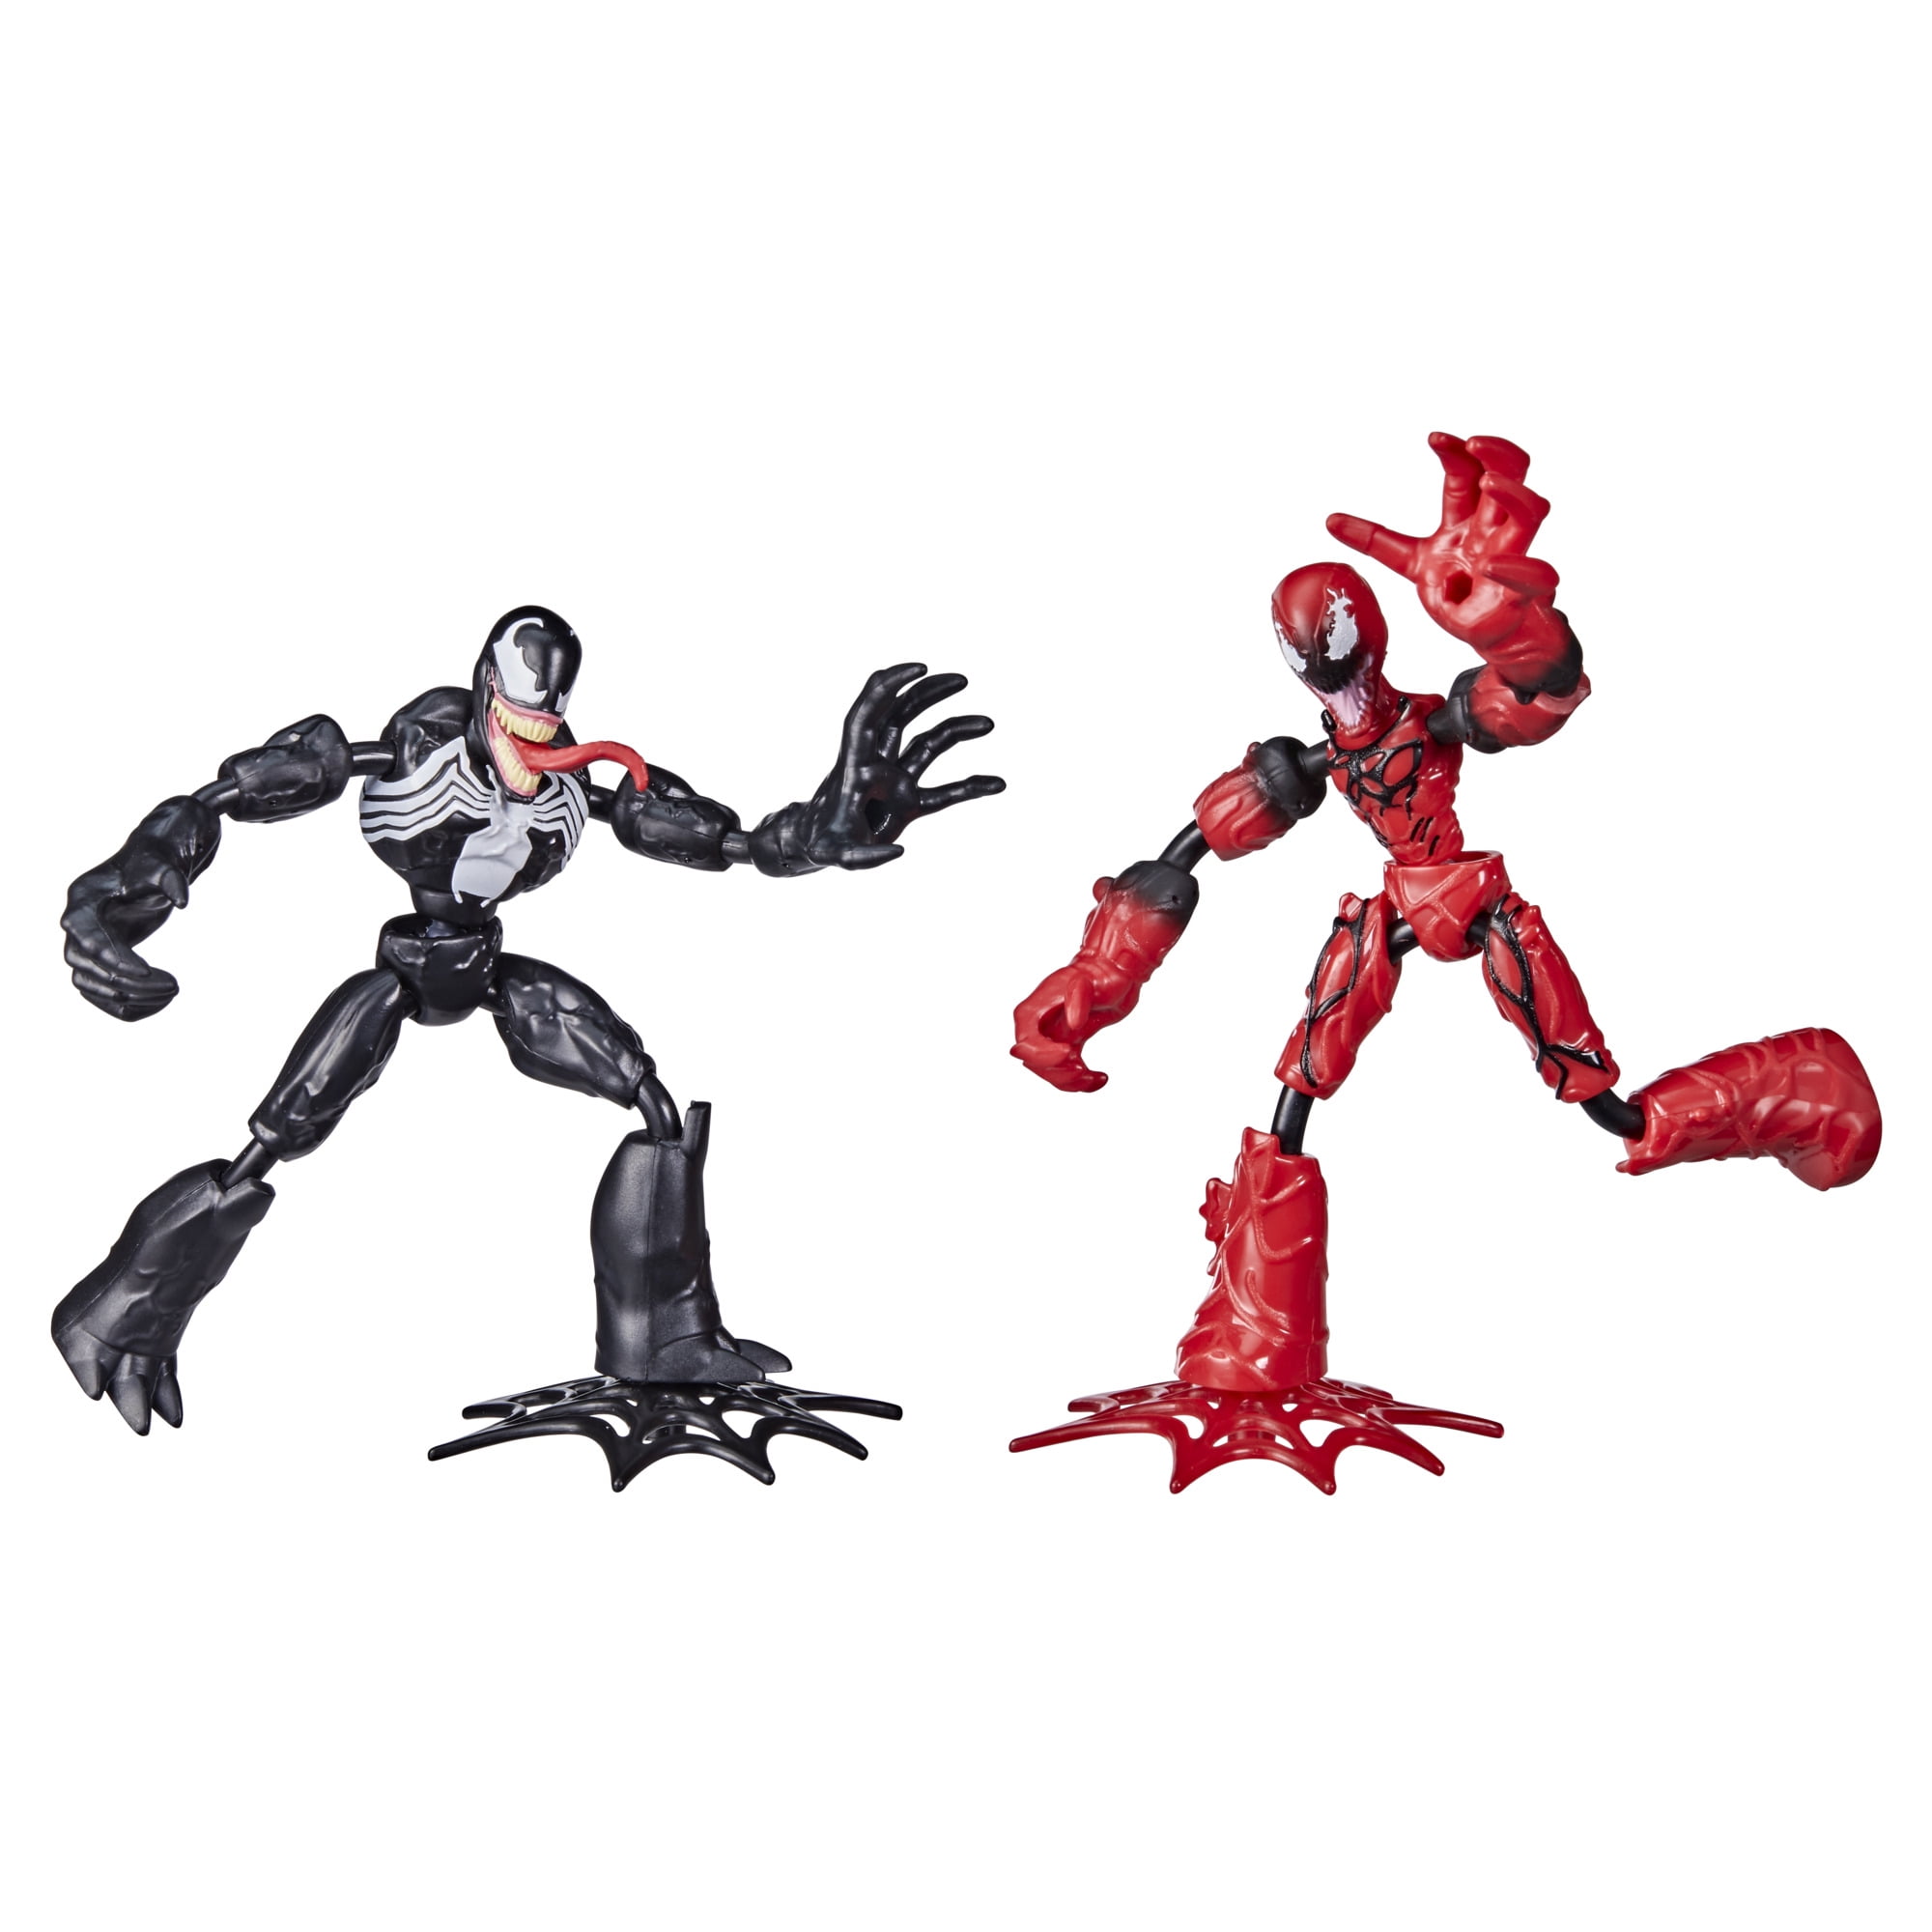 Details about   Red Venom Carnage Action Figure Spider Man Statue Model Toy Gift PVC Juguete 